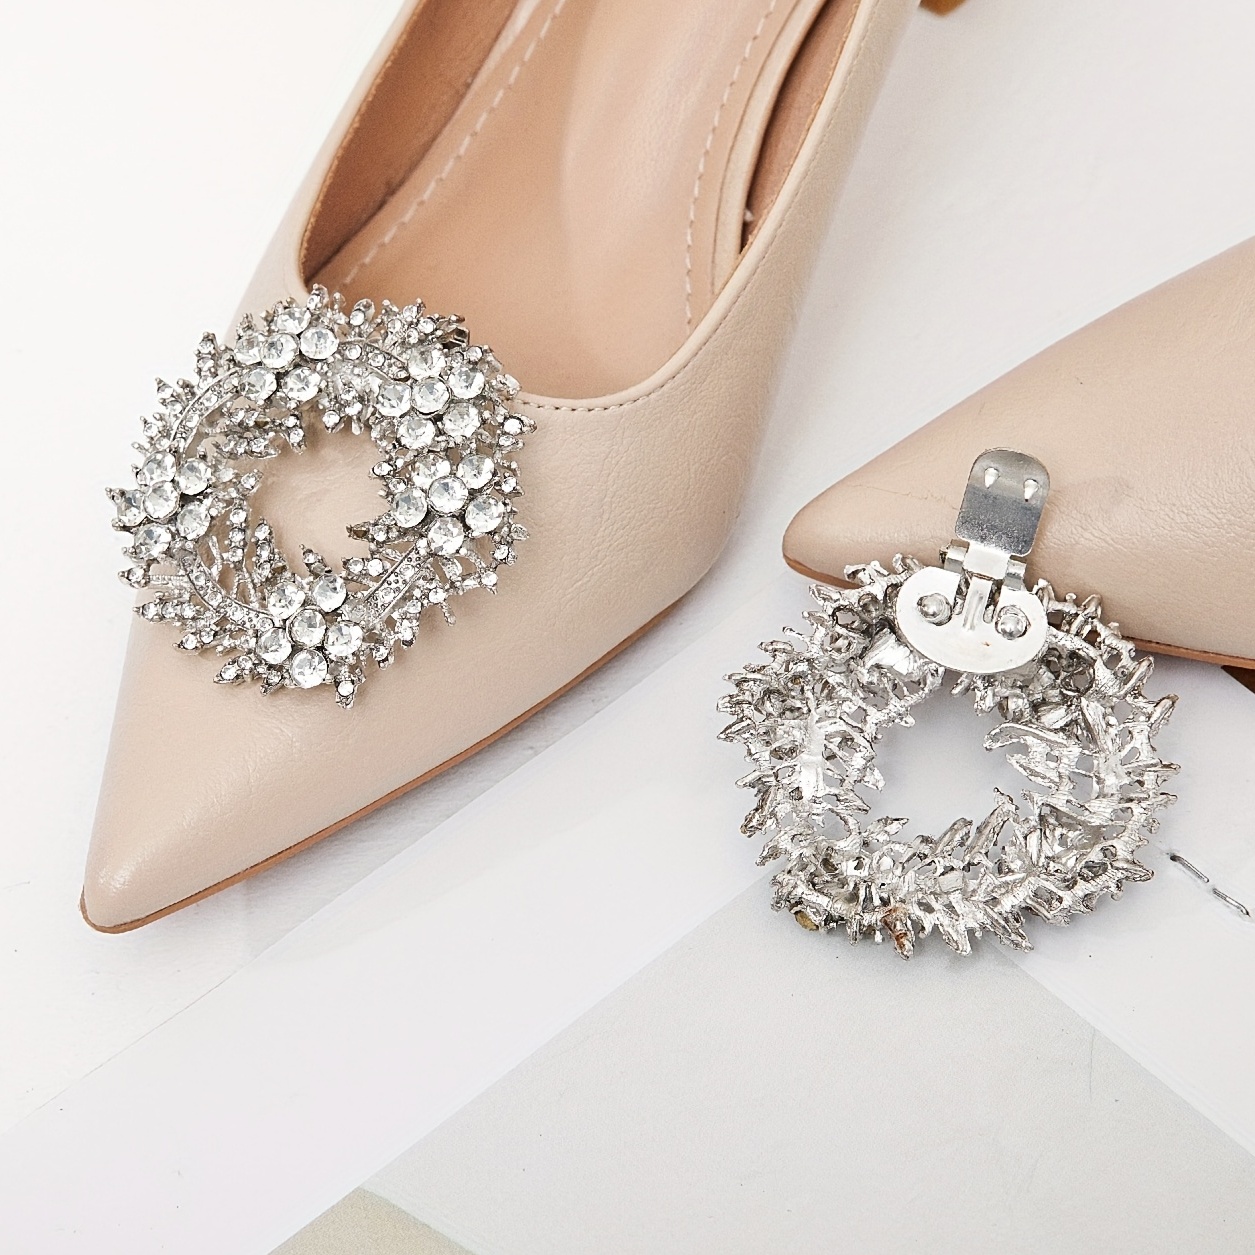 1/2pcs Trendy Shiny Shoe Clips For High Heels, Dress Hat Clips For Wedding  Party